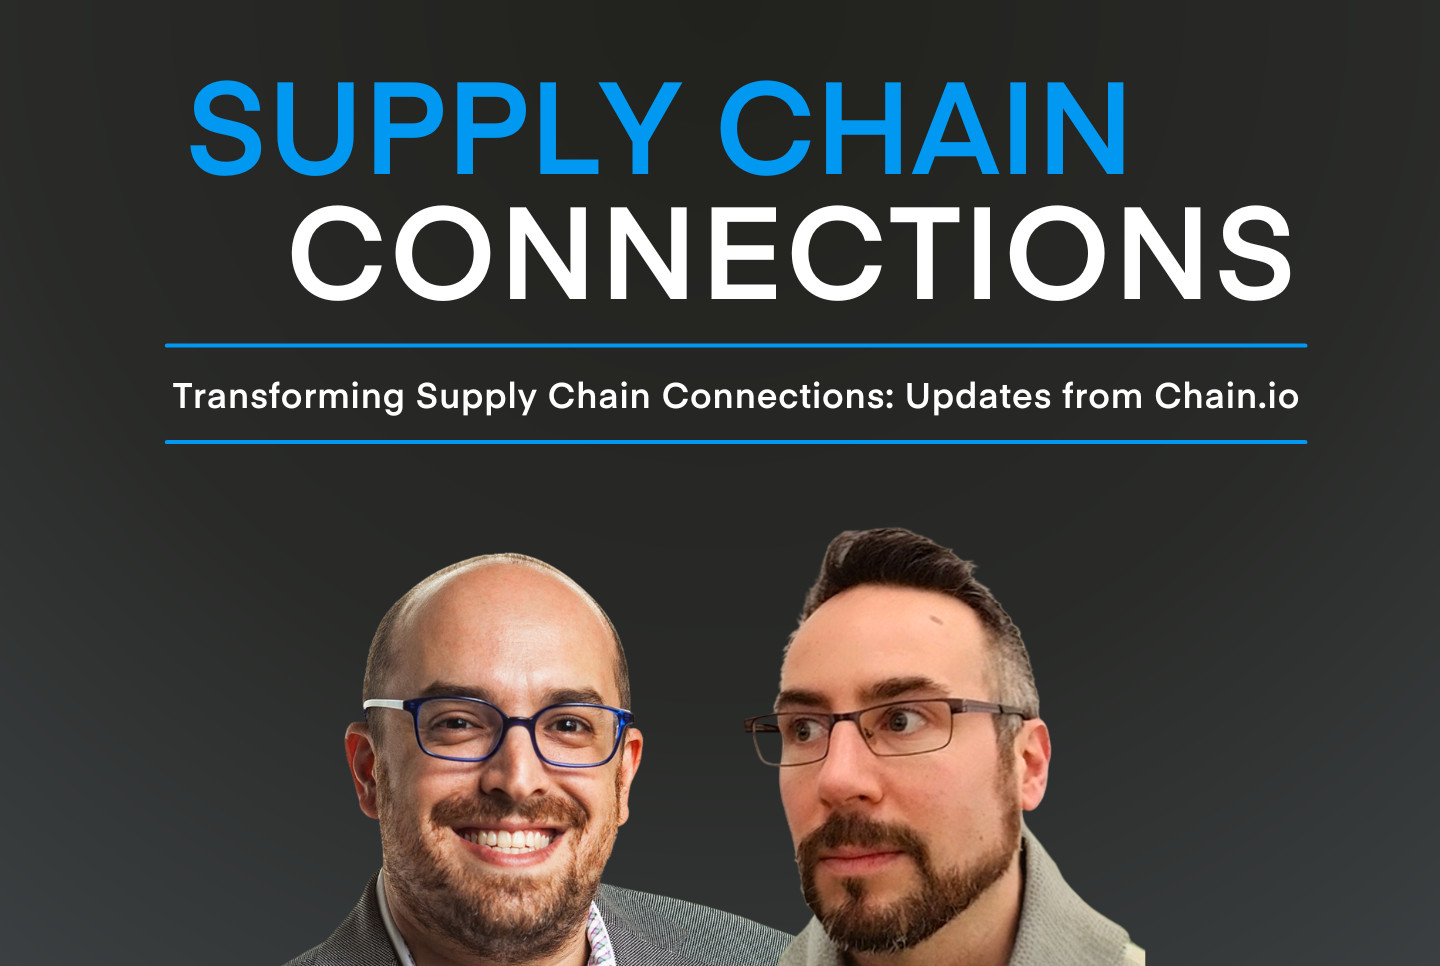 Transforming Supply Chain Connections: Updates from Chain.io